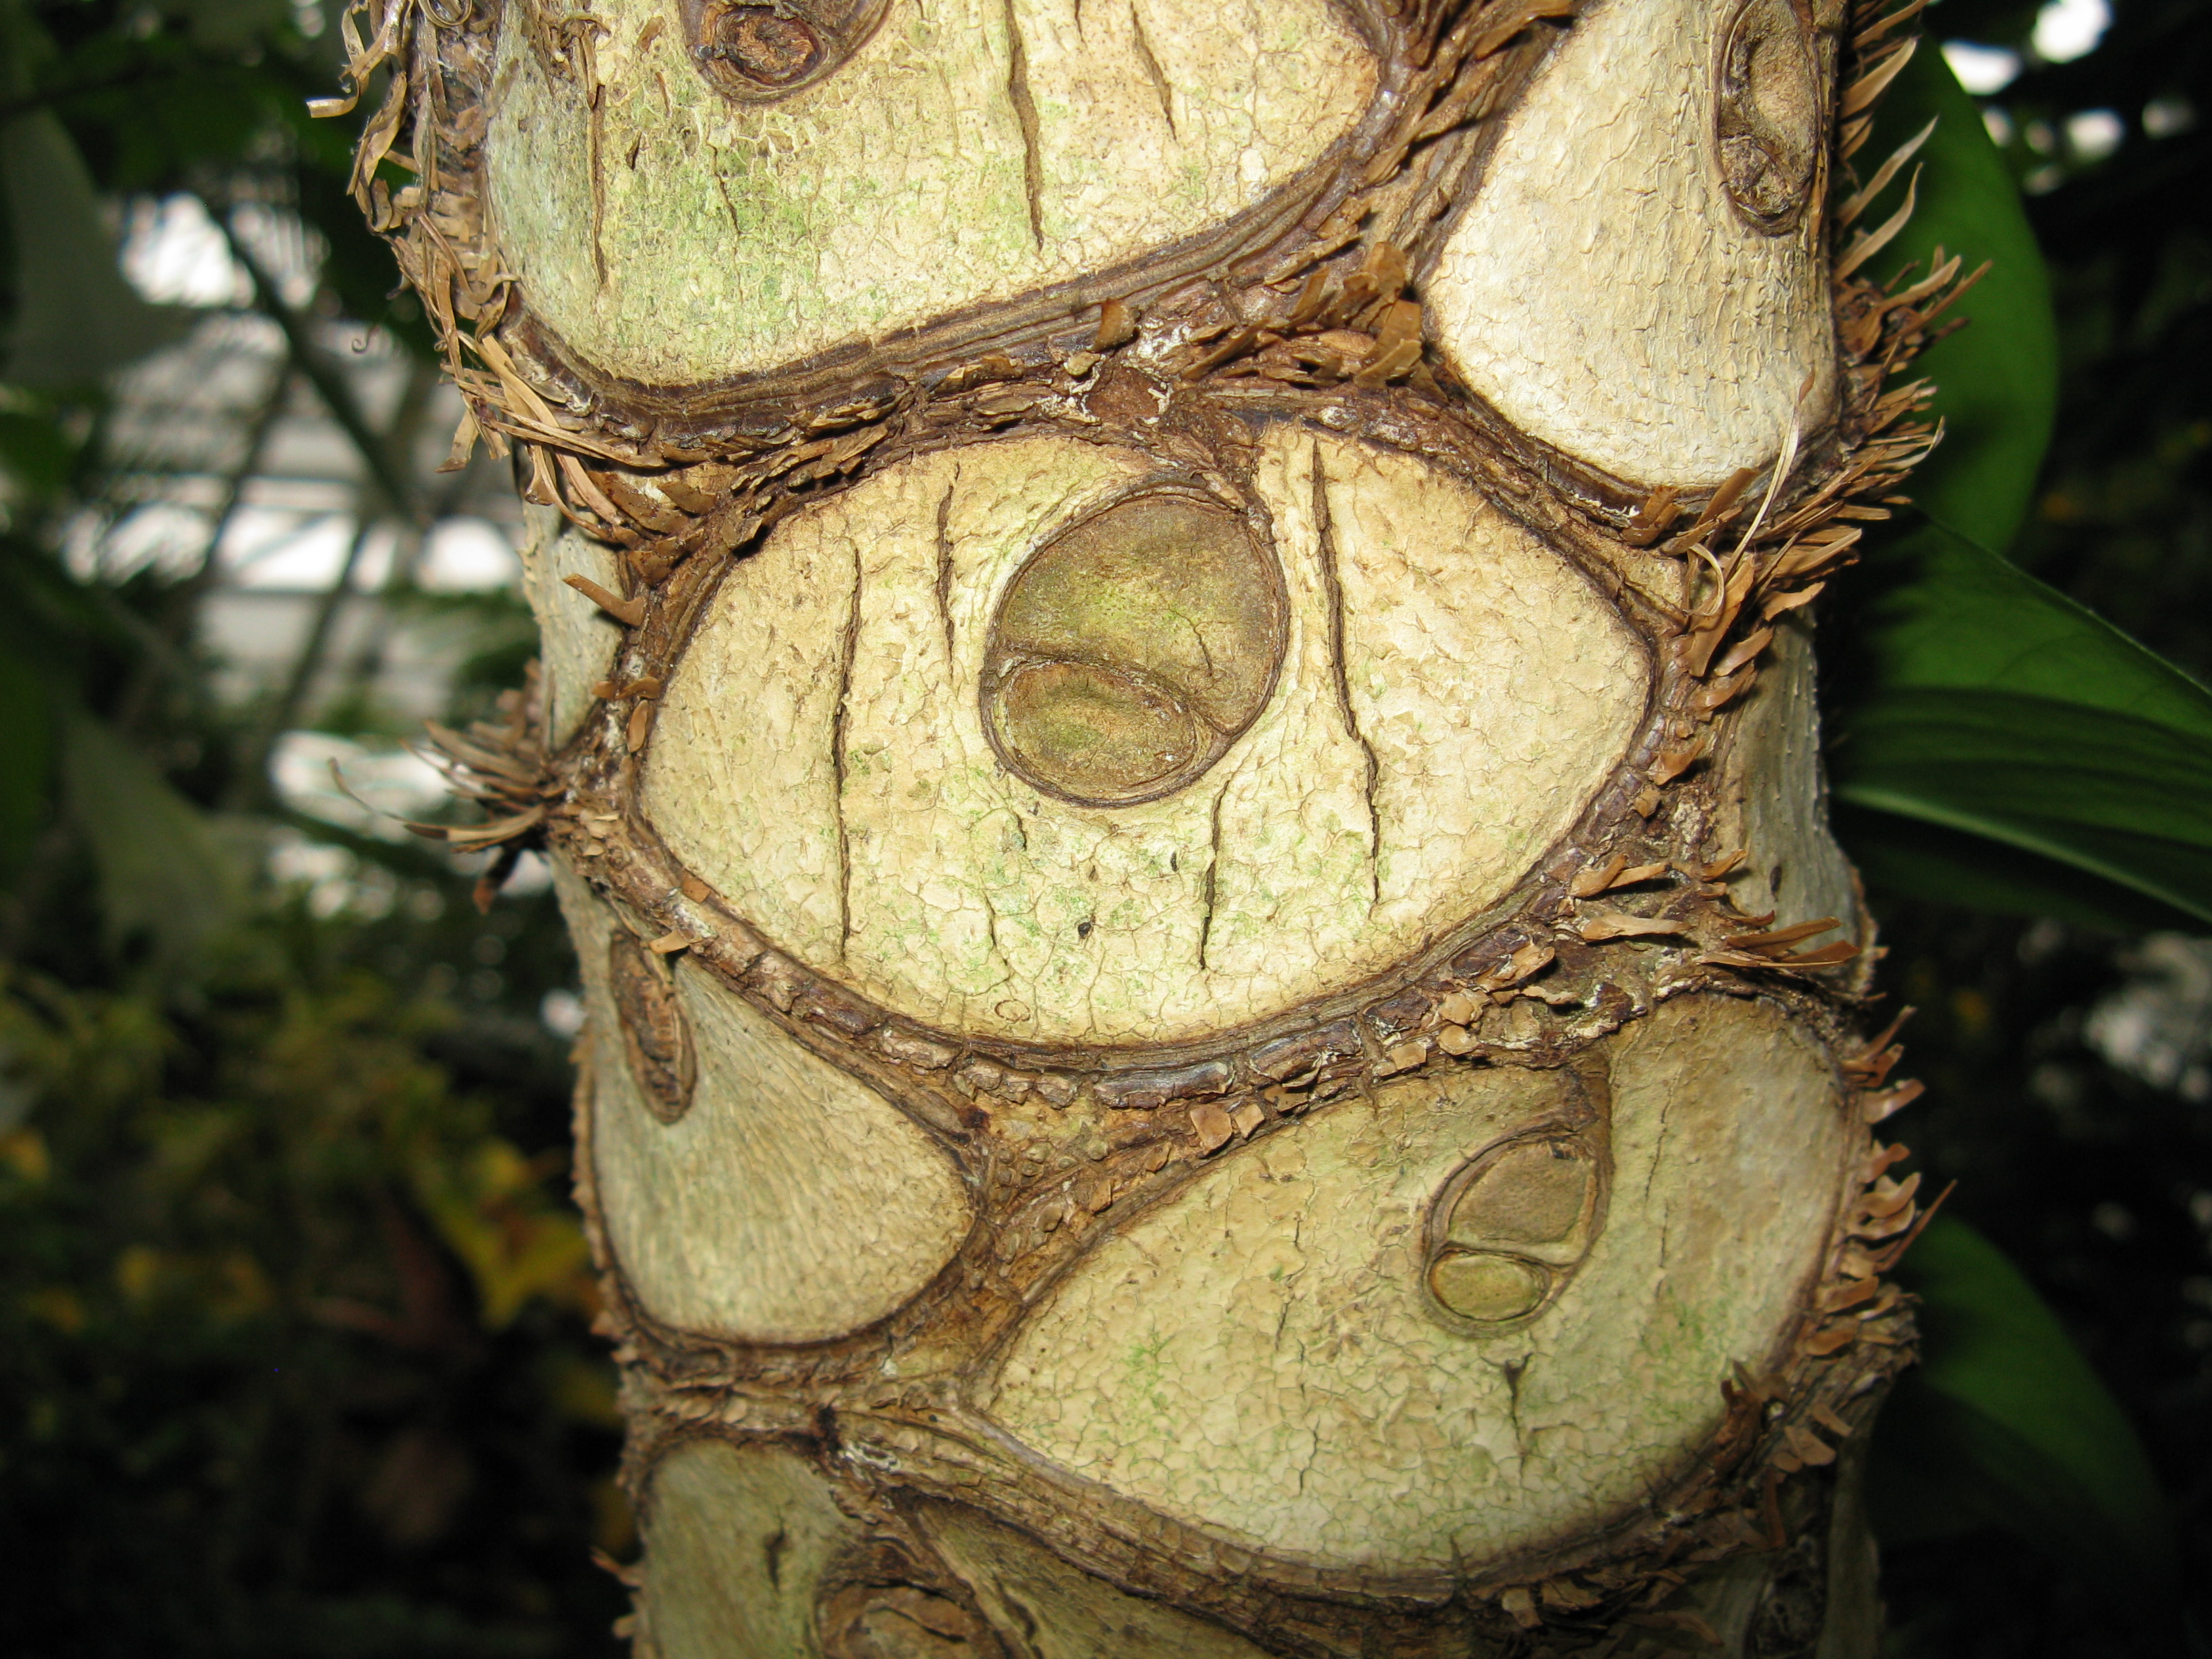 File:Philodendron selloum1.jpg - Wikimedia Commons